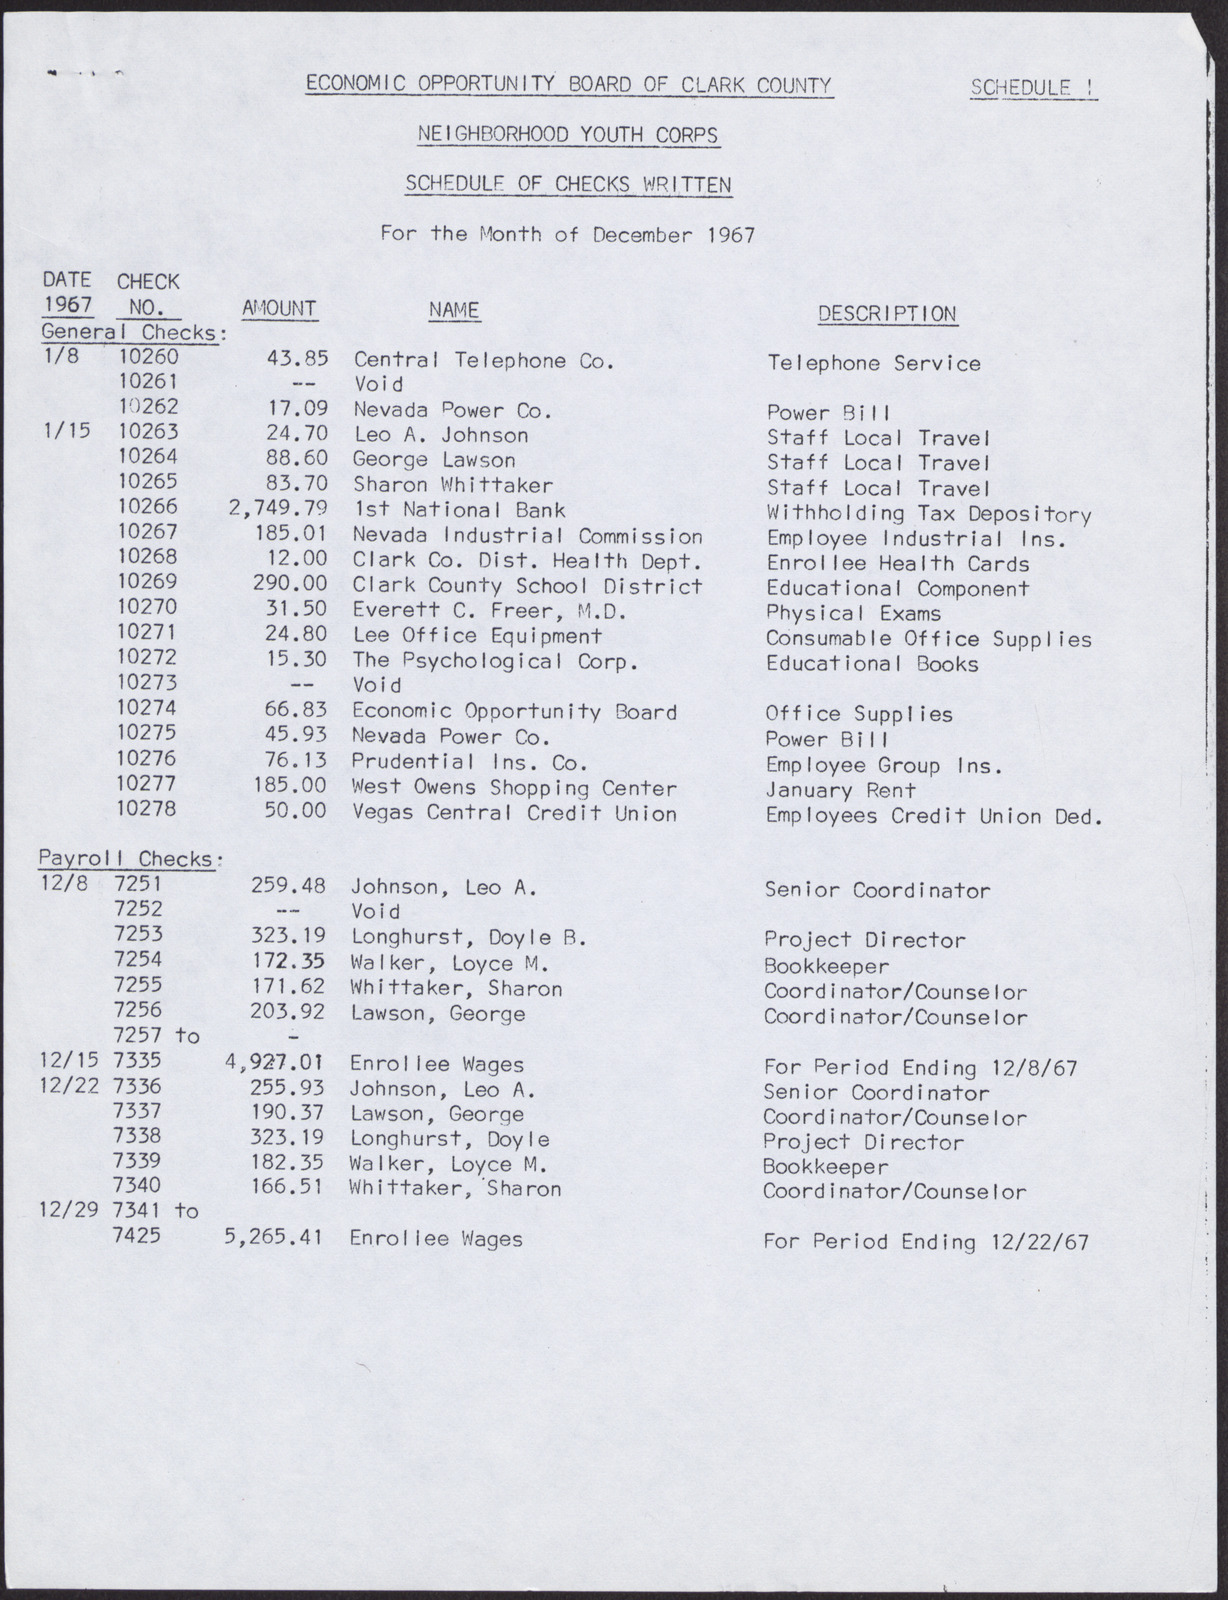 Economic Opportunity Board of Clark County Neighborhood Youth Corps Financial Position, Statement of Budgeted and Actual Expenditures, and Schedule of Checks Written (3 pages), December 1967, page 3